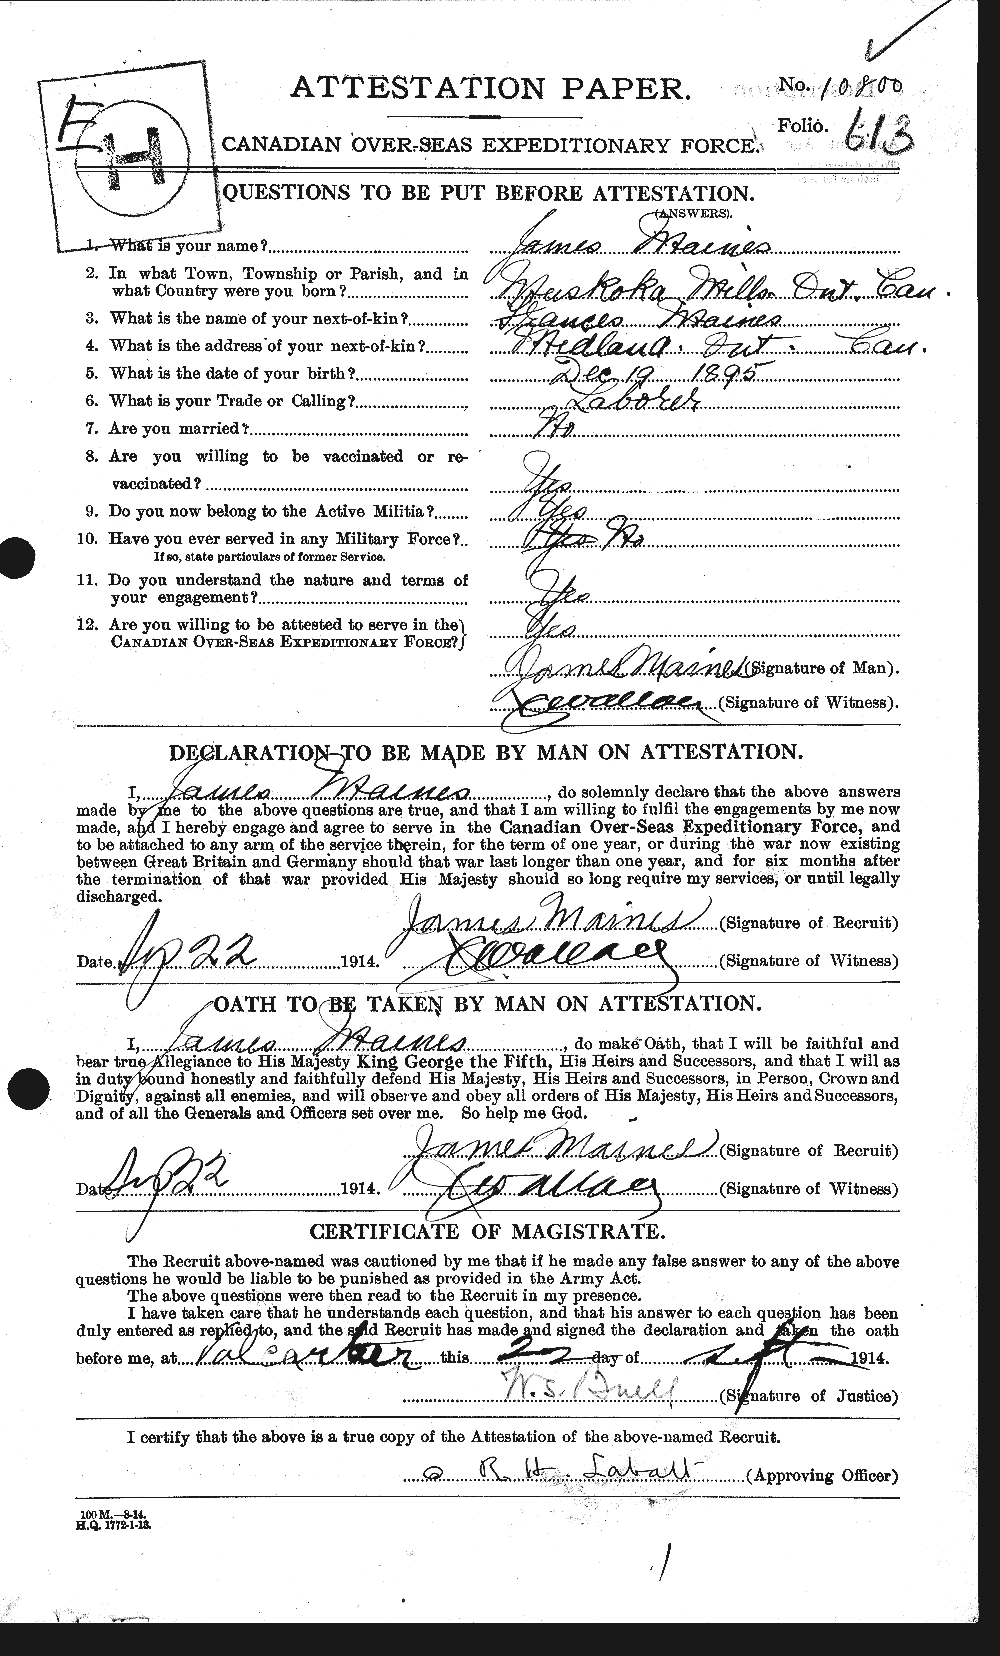 Personnel Records of the First World War - CEF 471481a